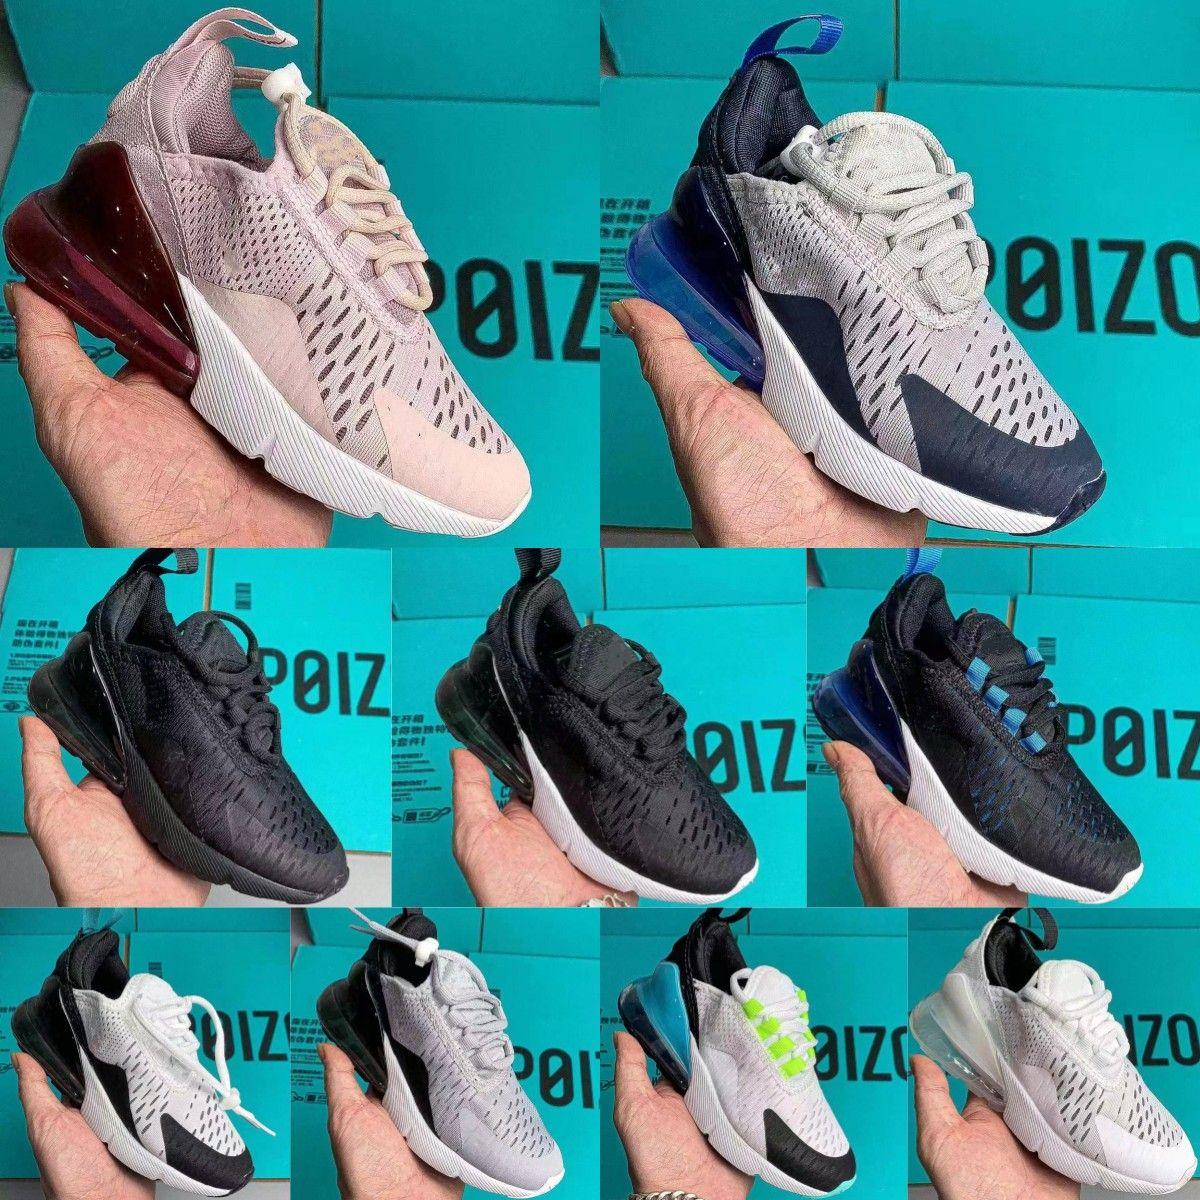 

Kids Shoes 270 Designer Toddlers Running Sneakers Boys Childrens 270s Kid shoe max Outdoor Sport Trainers Youth Infants Baby Casual runners